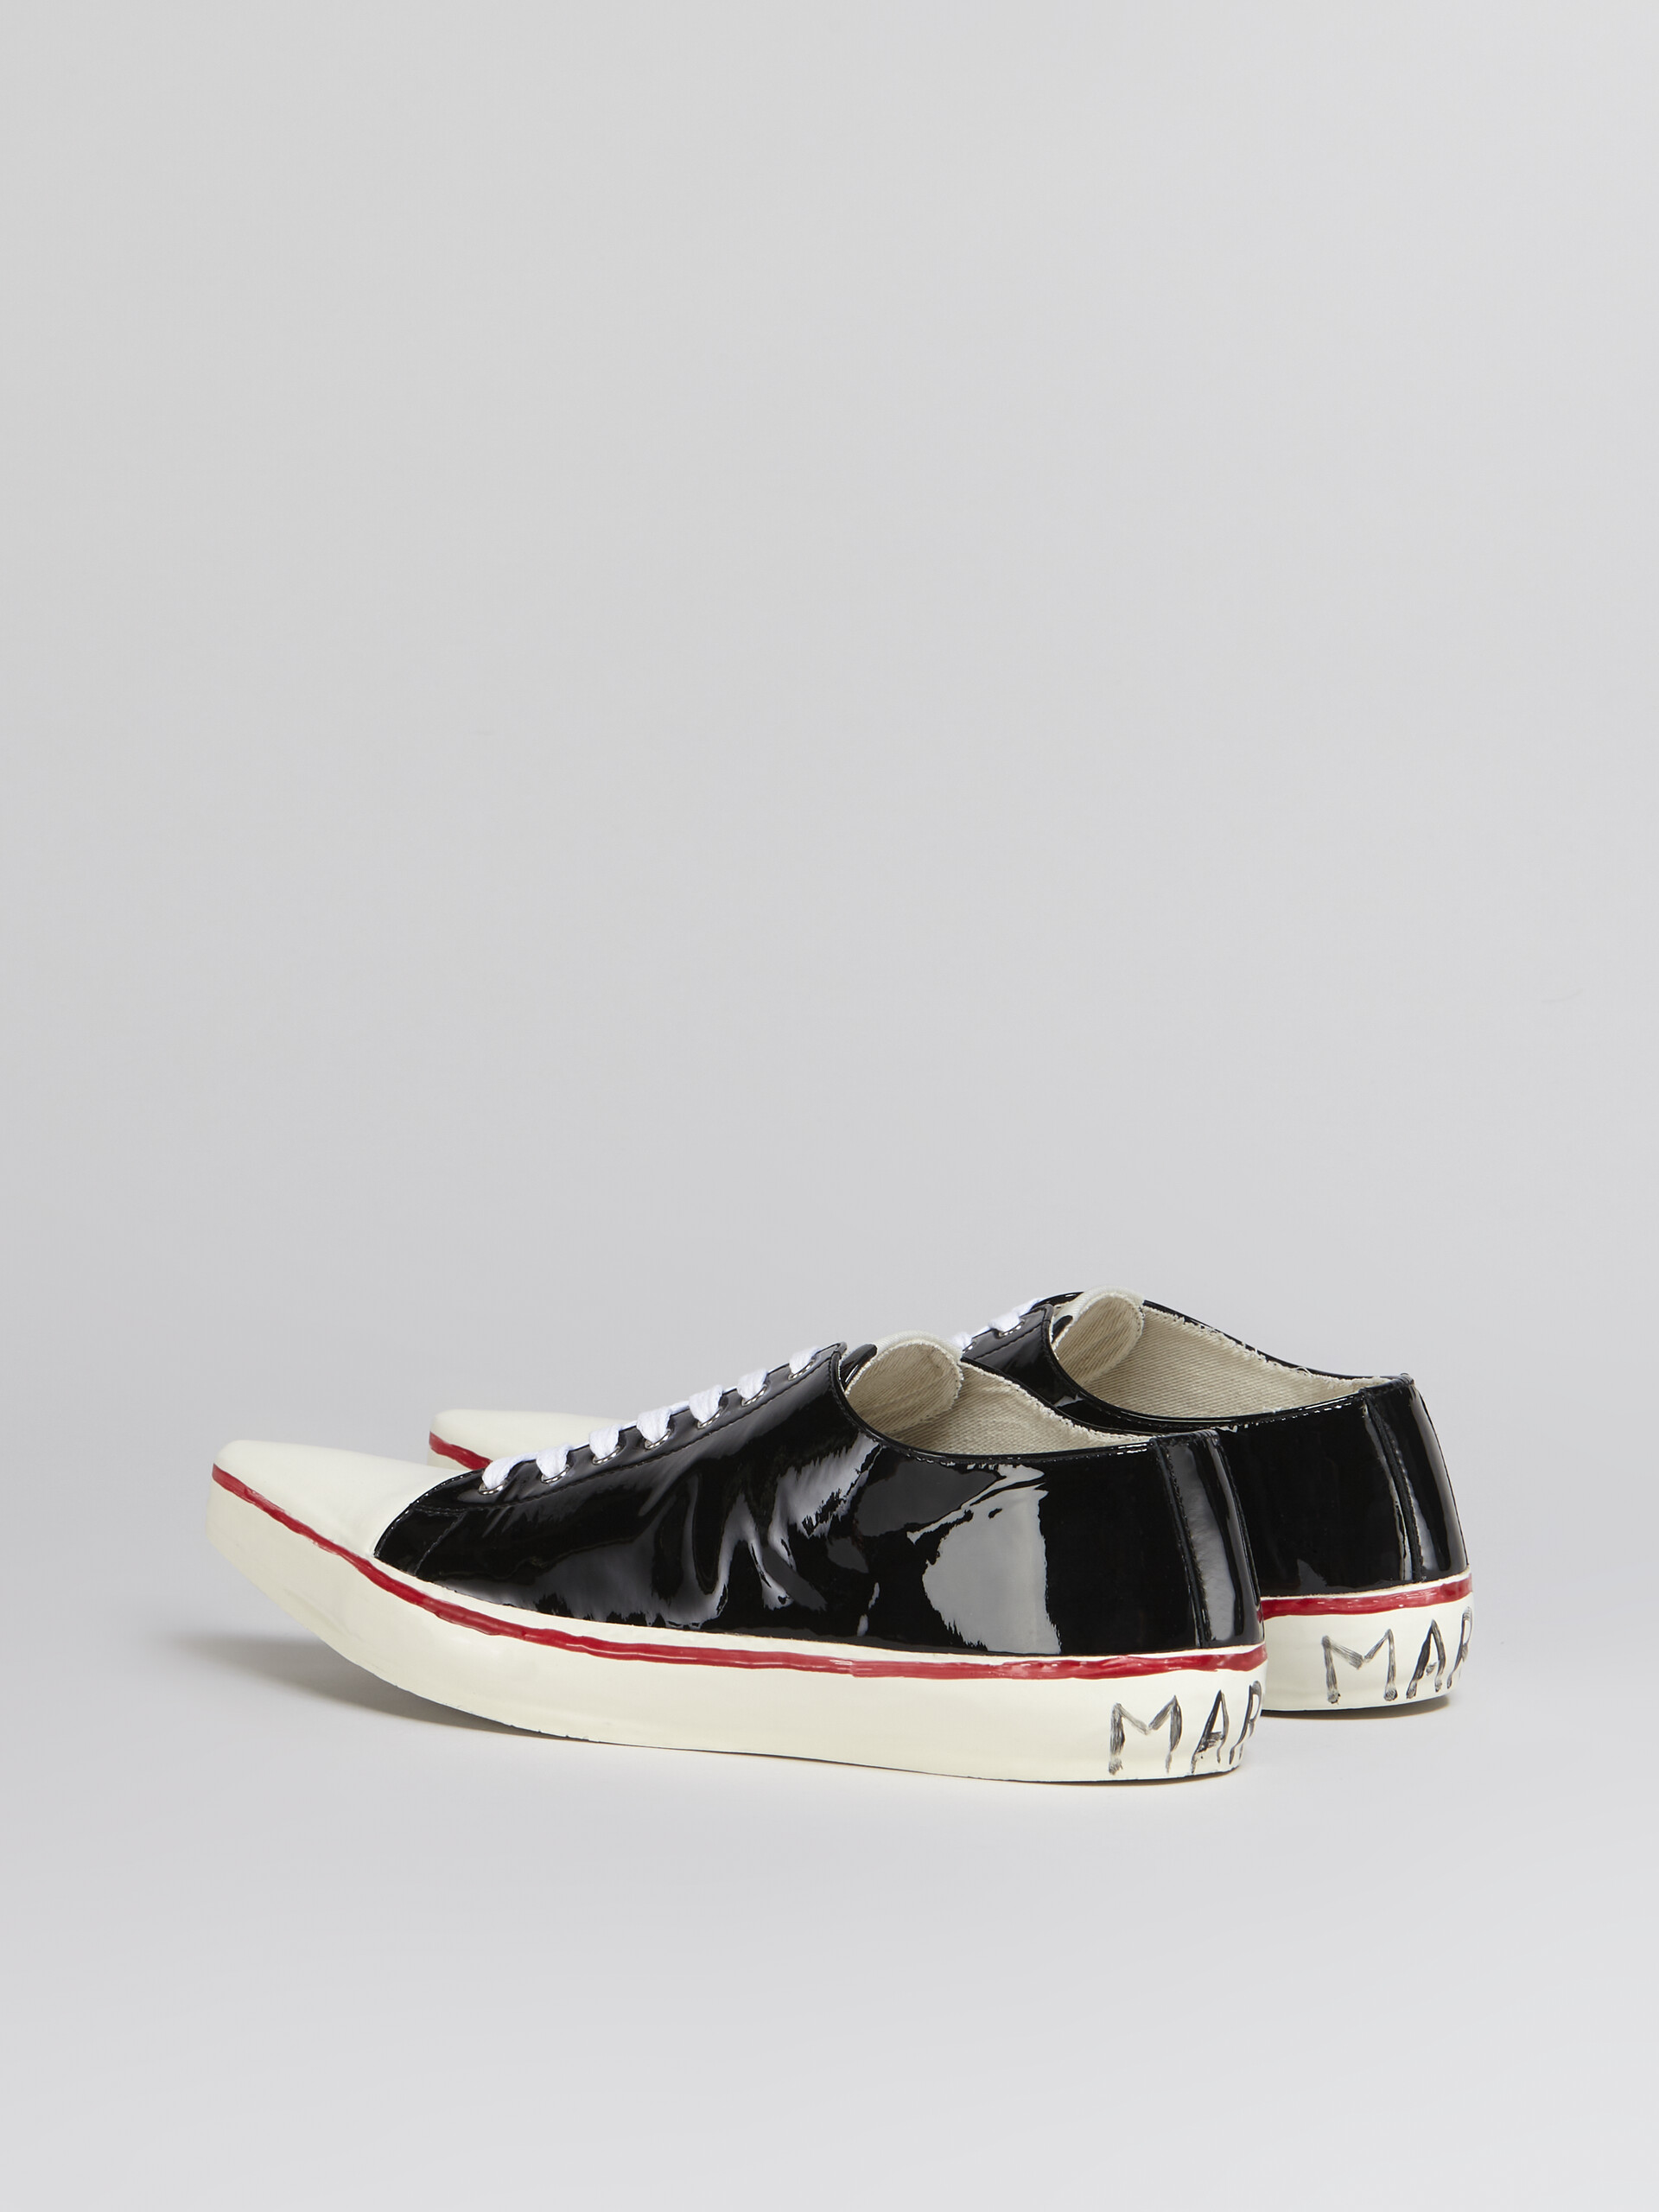 Patent leather GOOEY low-top sneaker w/Marni graffiti-style signature - Sneakers - Image 3